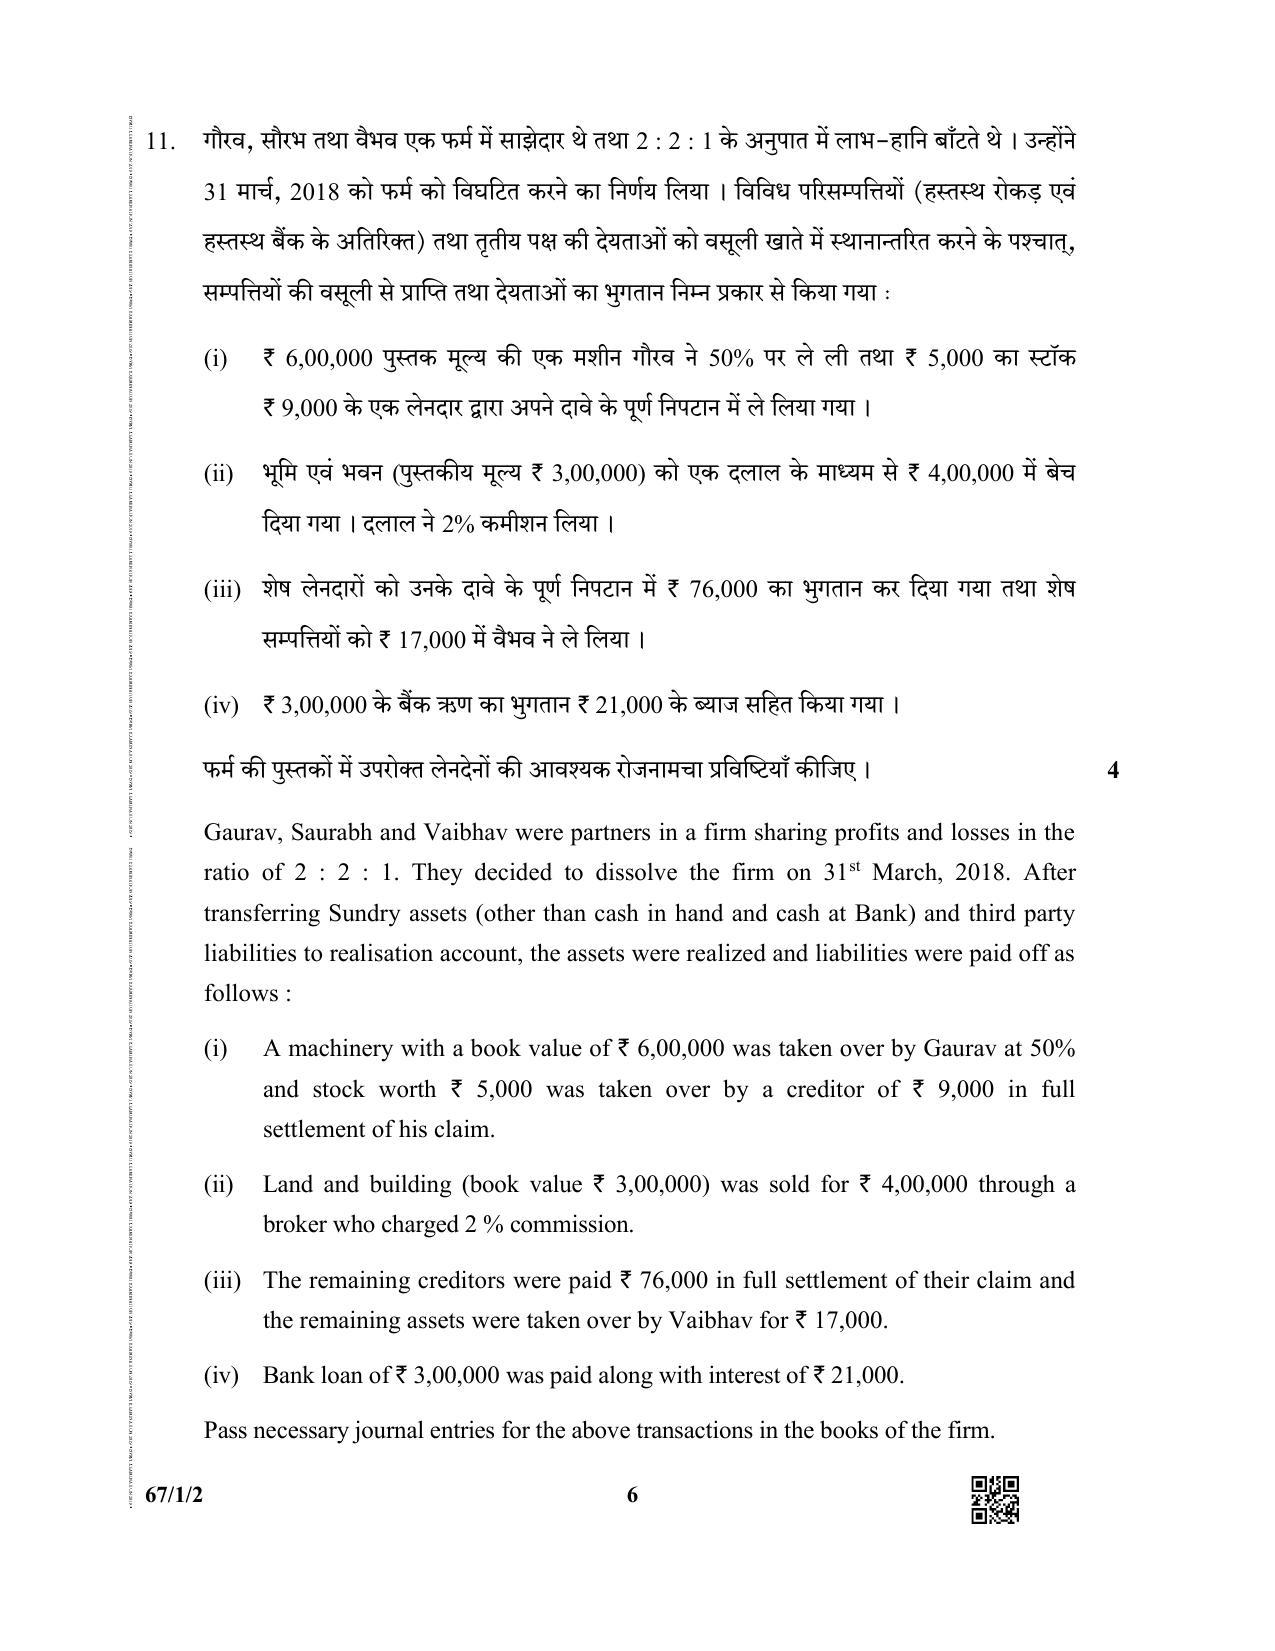 CBSE Class 12 67-1-2  (Accountancy) 2019 Question Paper - Page 6